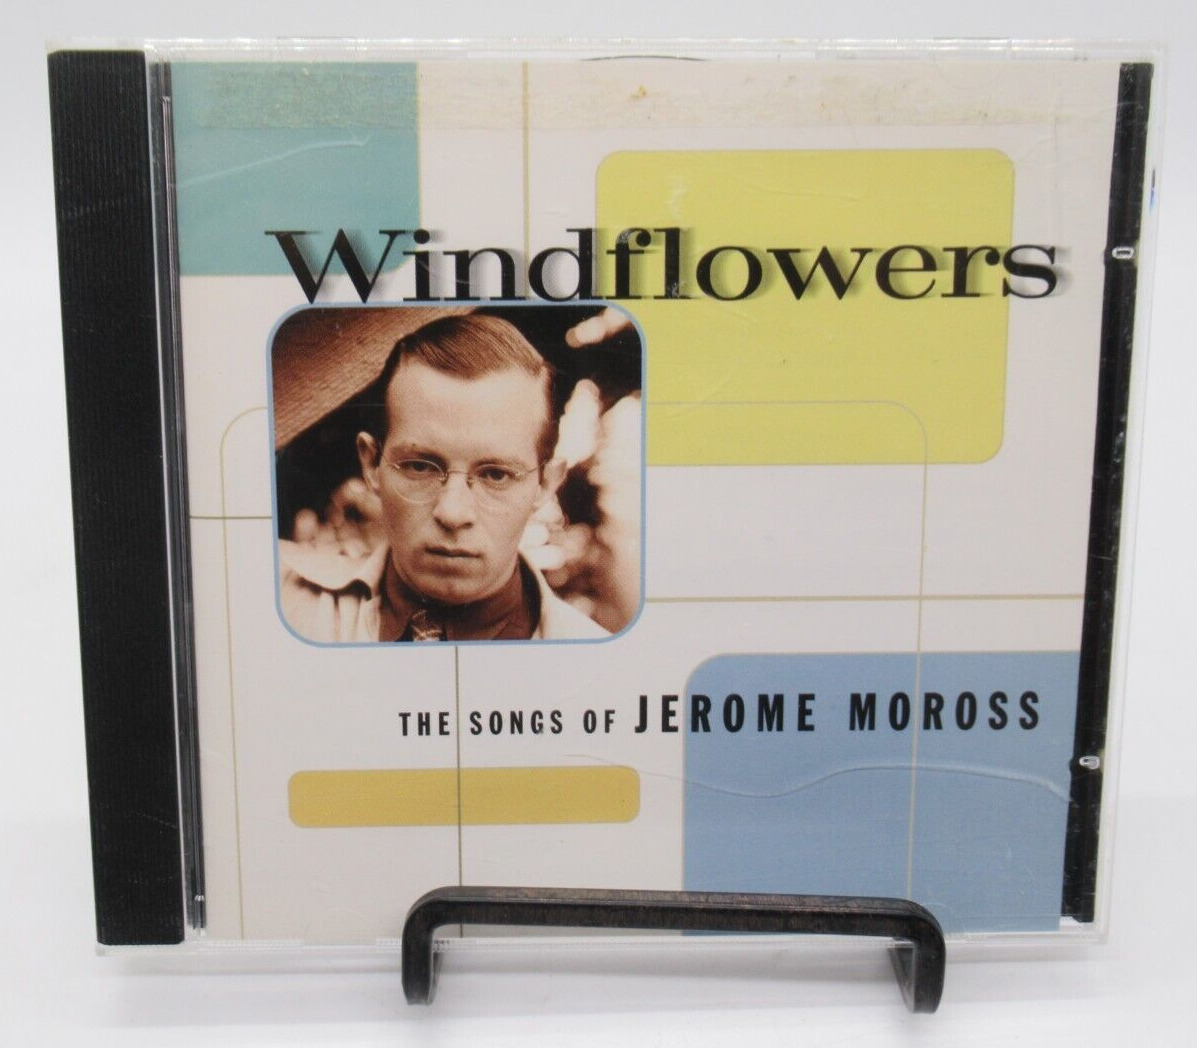 ALICE RIPLEY - WINDFLOWERS: THE SONGS OF JEROME MOROSS MUSIC CD, 18 TRACKS, PS